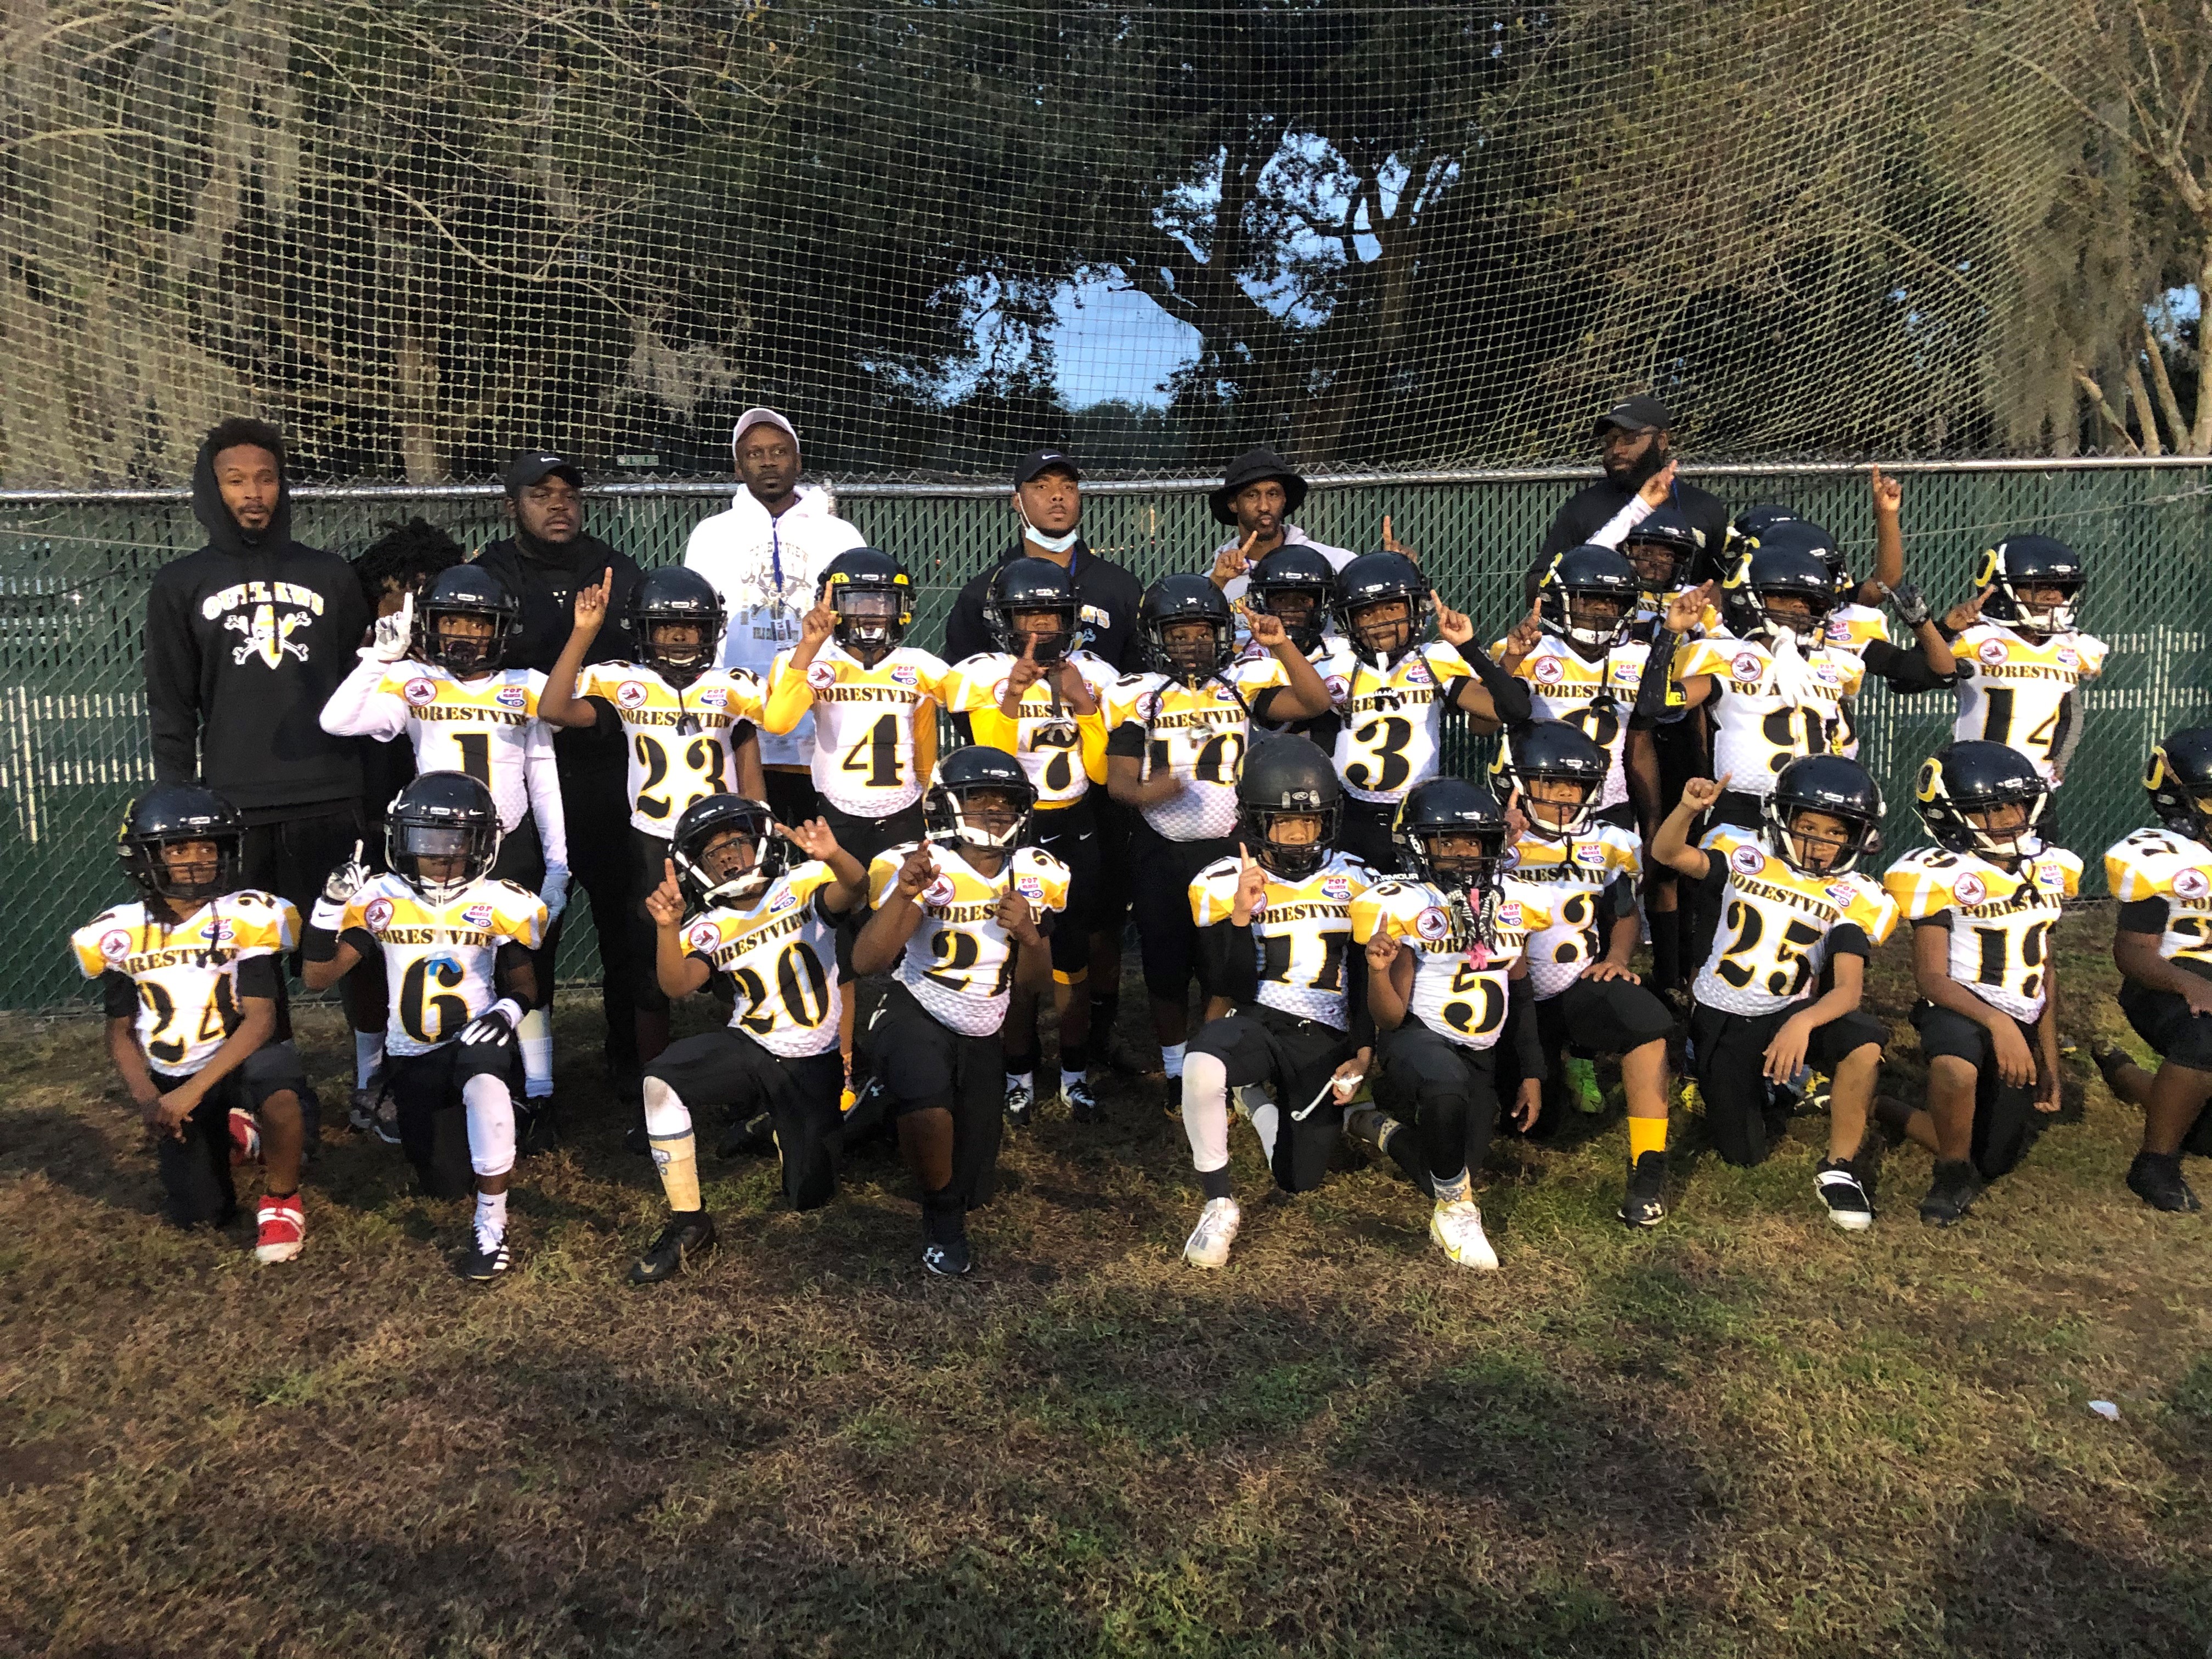 Pop Warner - Each football team has a dream to make it to the Pop